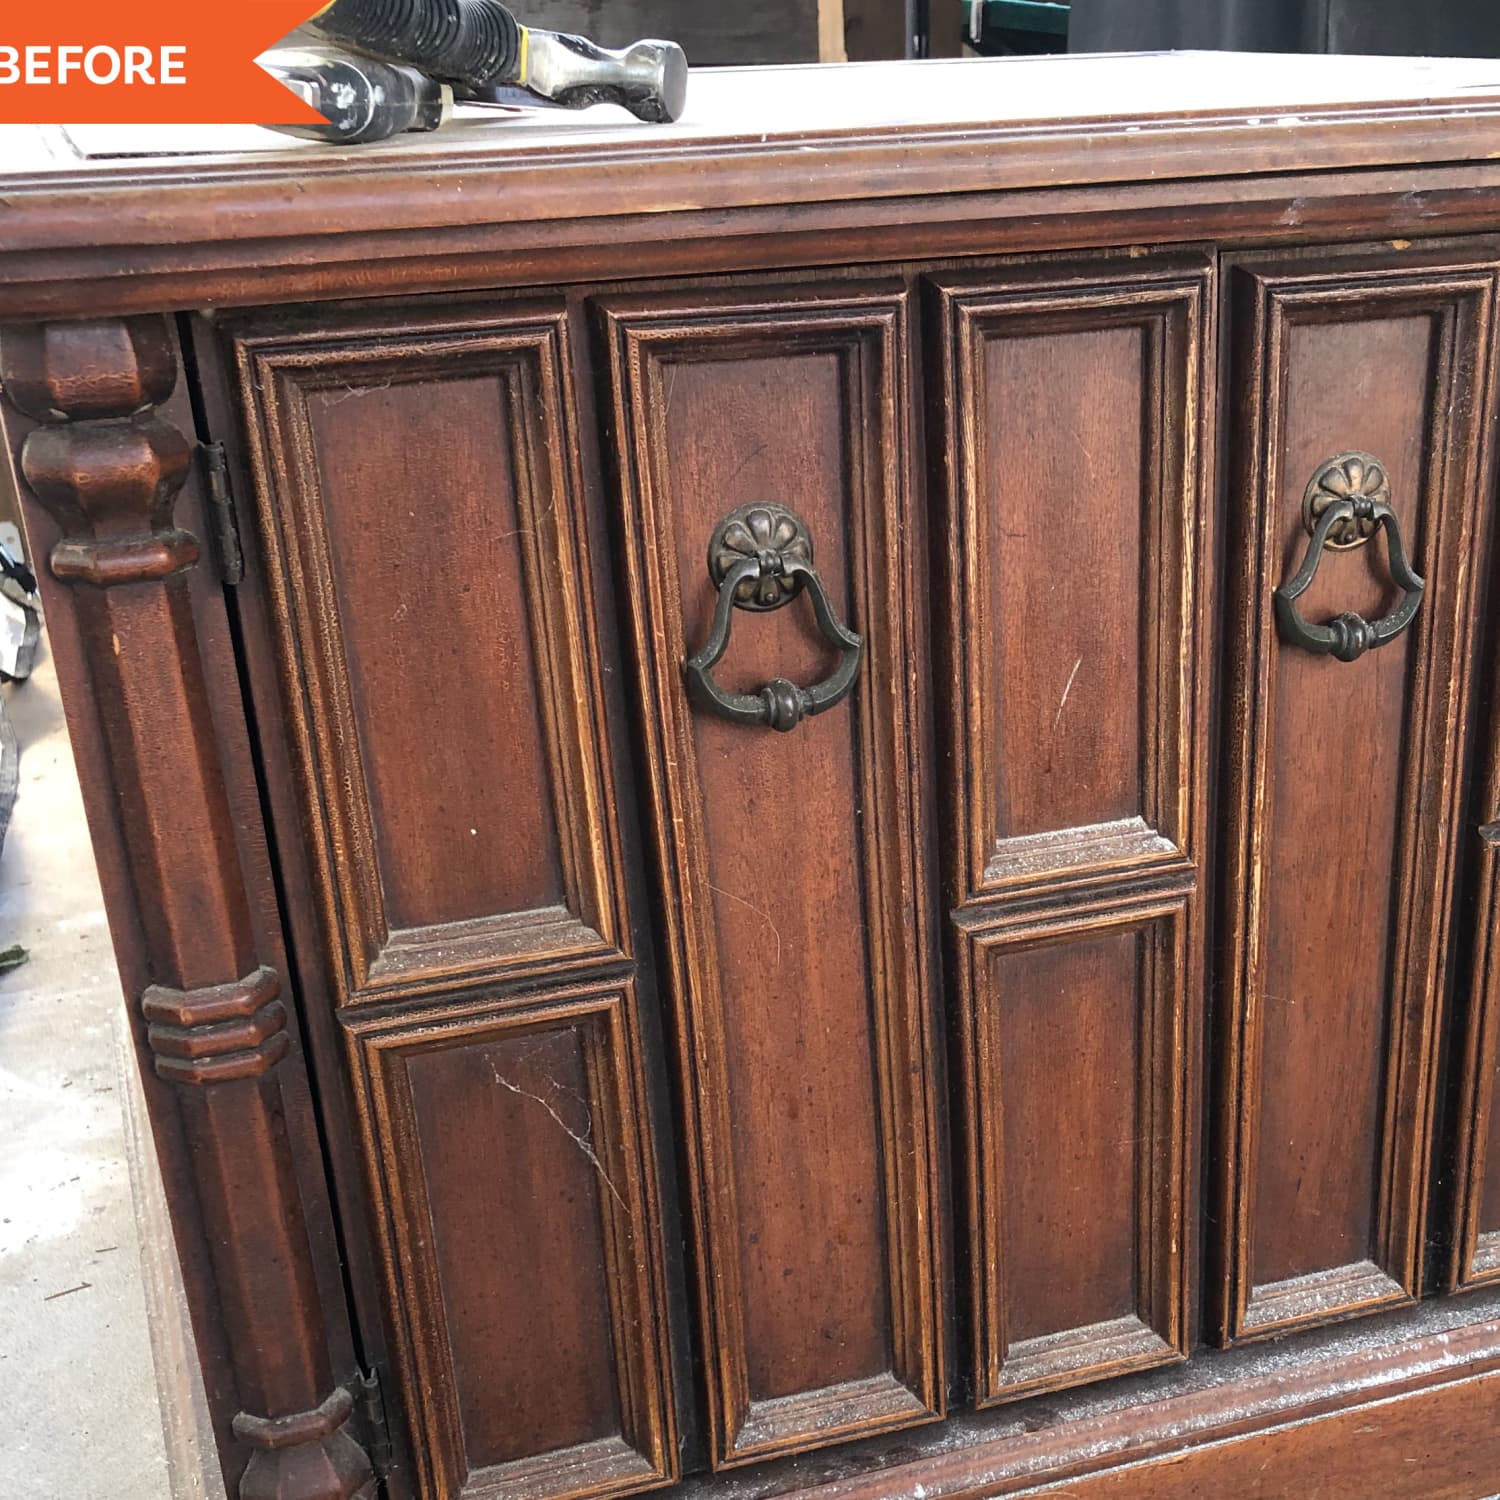 Products for easy DIY furniture restoration, Gallery posted by  BrandieHolloway